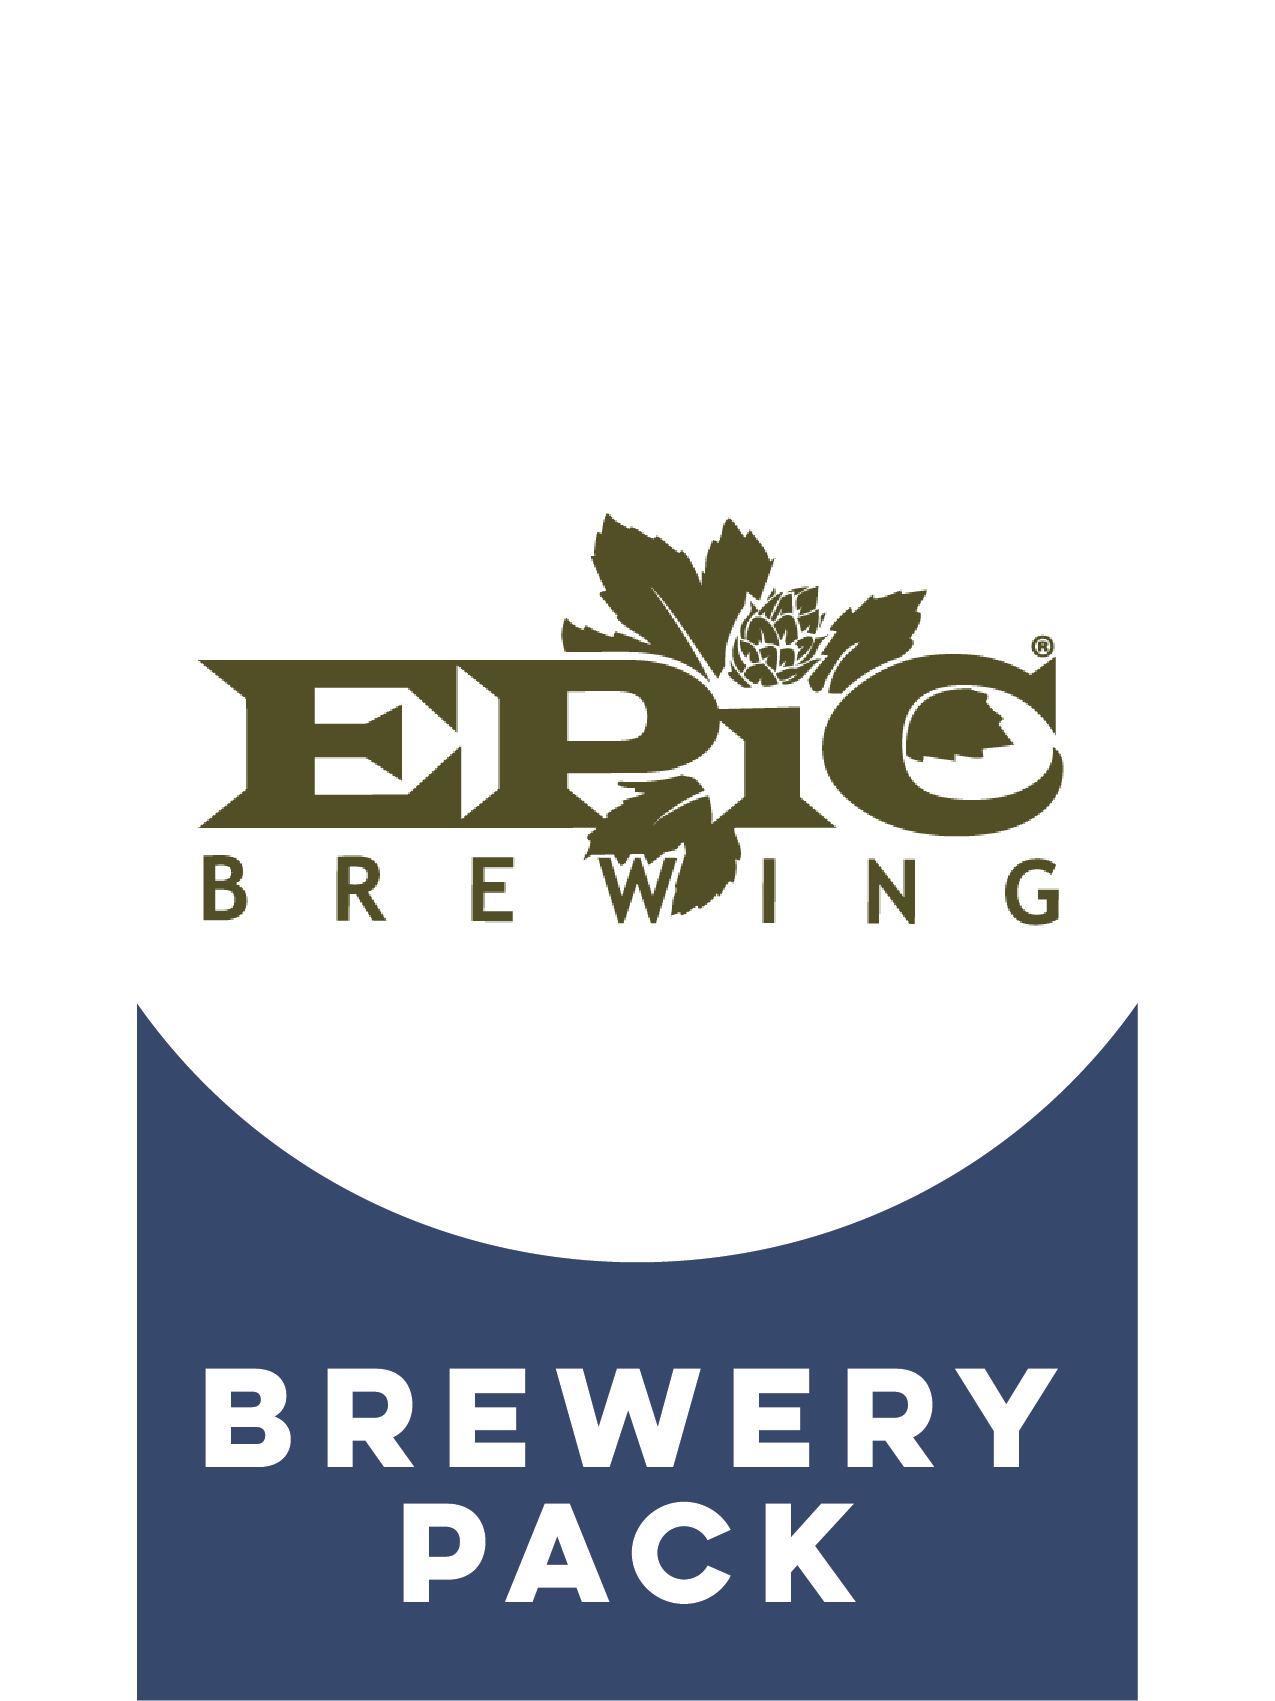 -Epic- The Epic BAPTIST Brewery Pack-Packs & Cases- Only @ Beer Republic - The best online beer store for American & Canadian craft beer - Buy beer online from the USA and Canada - Bier online kopen - Amerikaans bier kopen - Craft beer store - Craft beer kopen - Amerikanisch bier kaufen - Bier online kaufen - Acheter biere online - IPA - Stout - Porter - New England IPA - Hazy IPA - Imperial Stout - Barrel Aged - Barrel Aged Imperial Stout - Brown - Dark beer - Blond - Blonde - Pilsner - Lager - Wheat - Wei